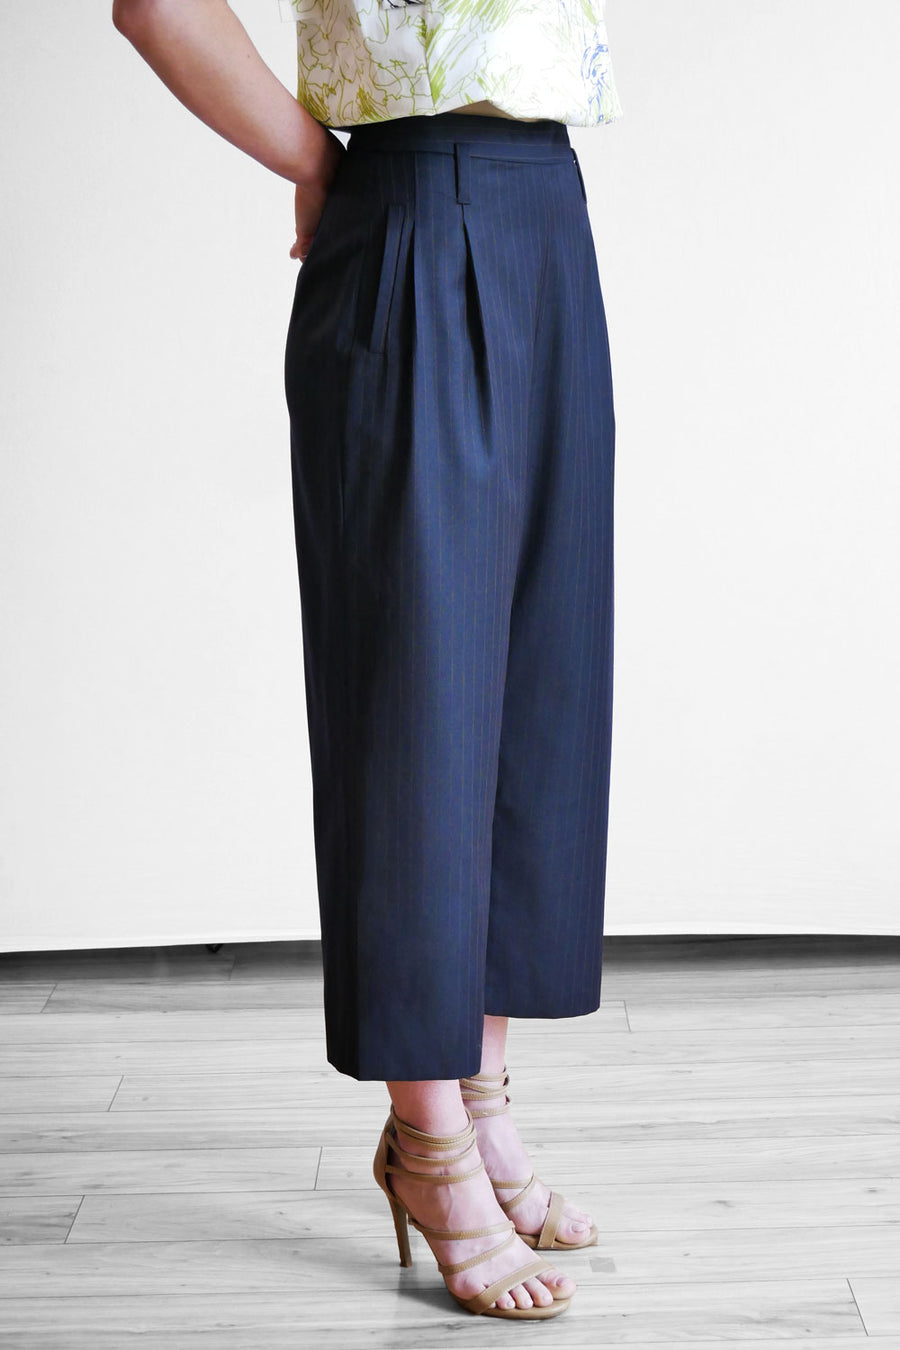 Tailored Culottes - Navy Pinstripes (US 4, 6, 8)